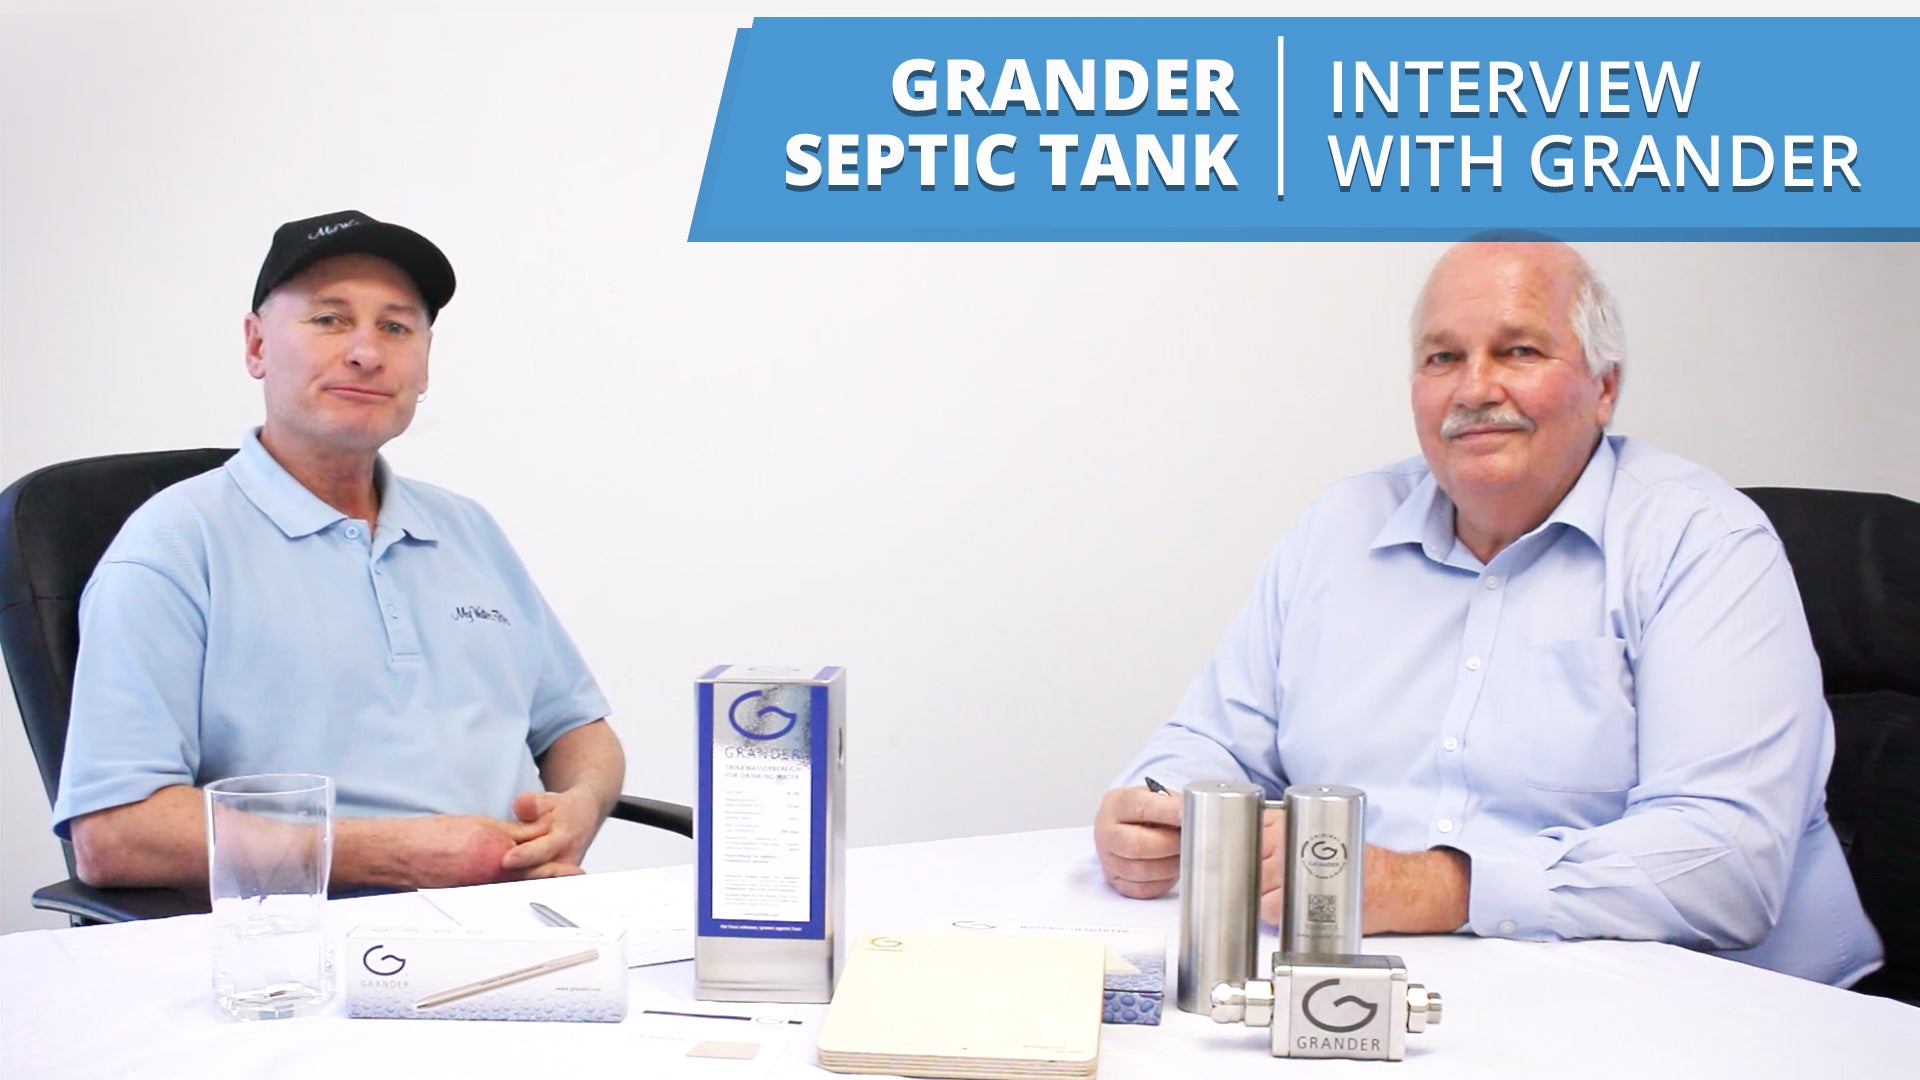 [VIDEO] Grander for Septic Tanks - Interview with Wayne from Grander